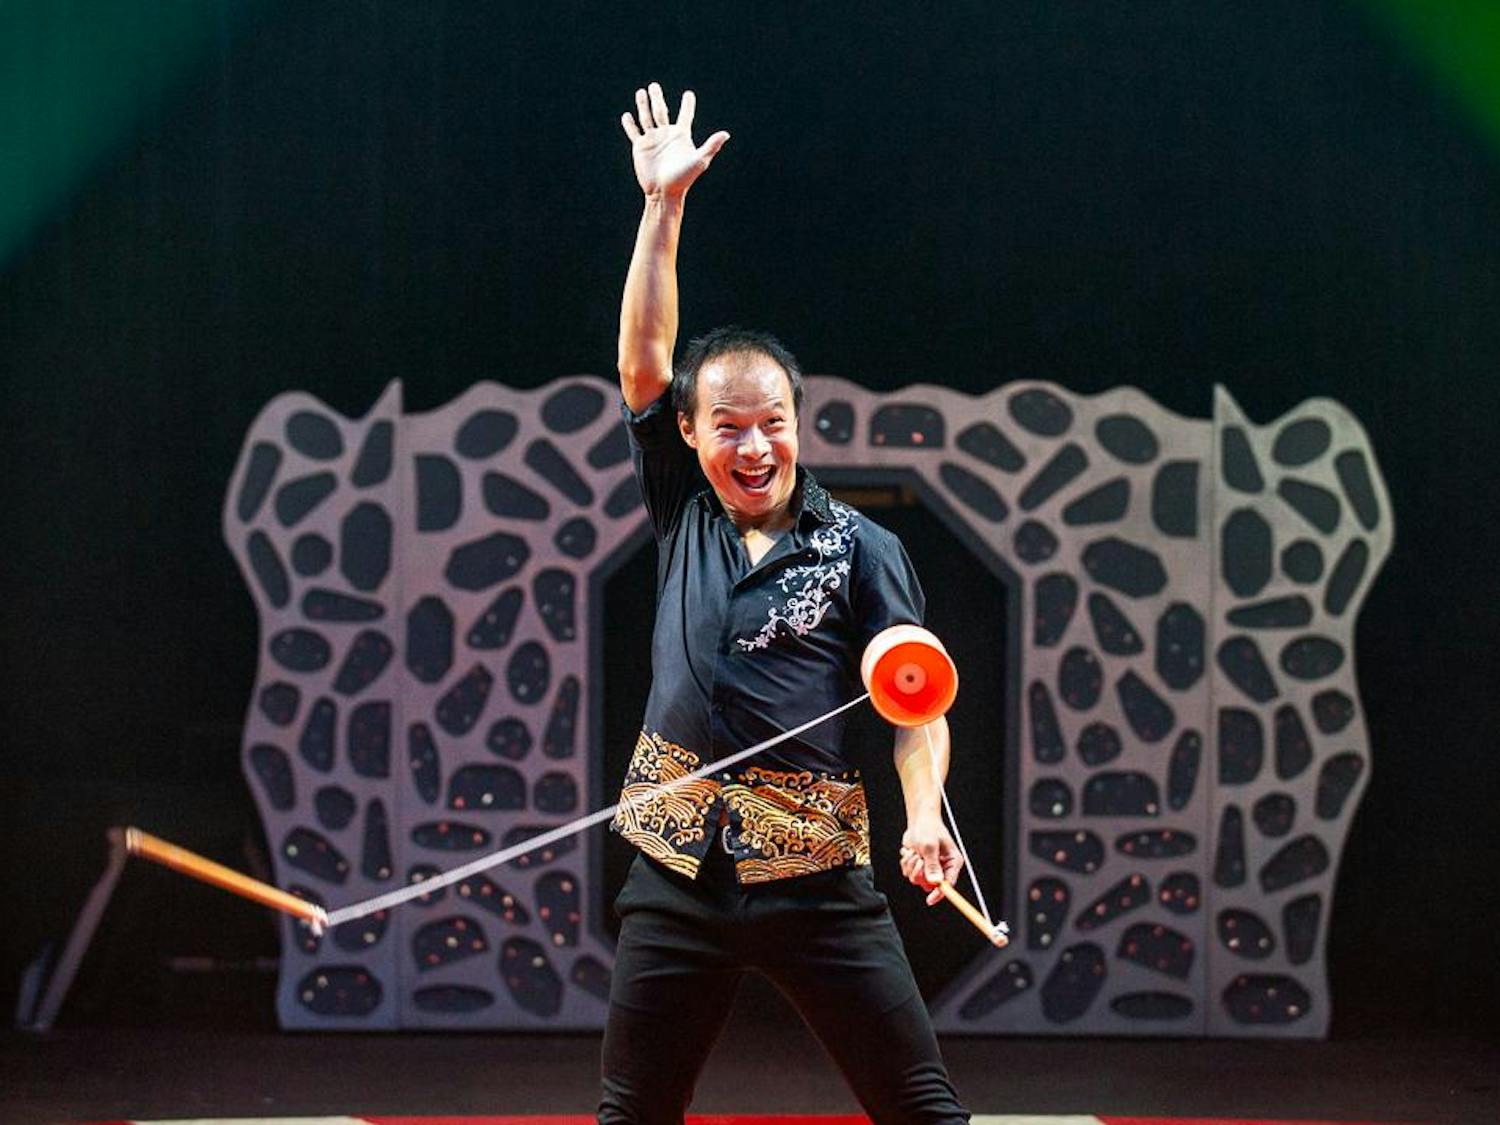 Diabolo artist Chu Chuan-Ho greets the audience during his performance at the CIRCUS at the Fair on Oct. 18, 2023. Diabolo is a juggling act in which the performer uses a pair of sticks and a string to juggle, toss and catch the diabolo, a pair of cups connected by an axle.